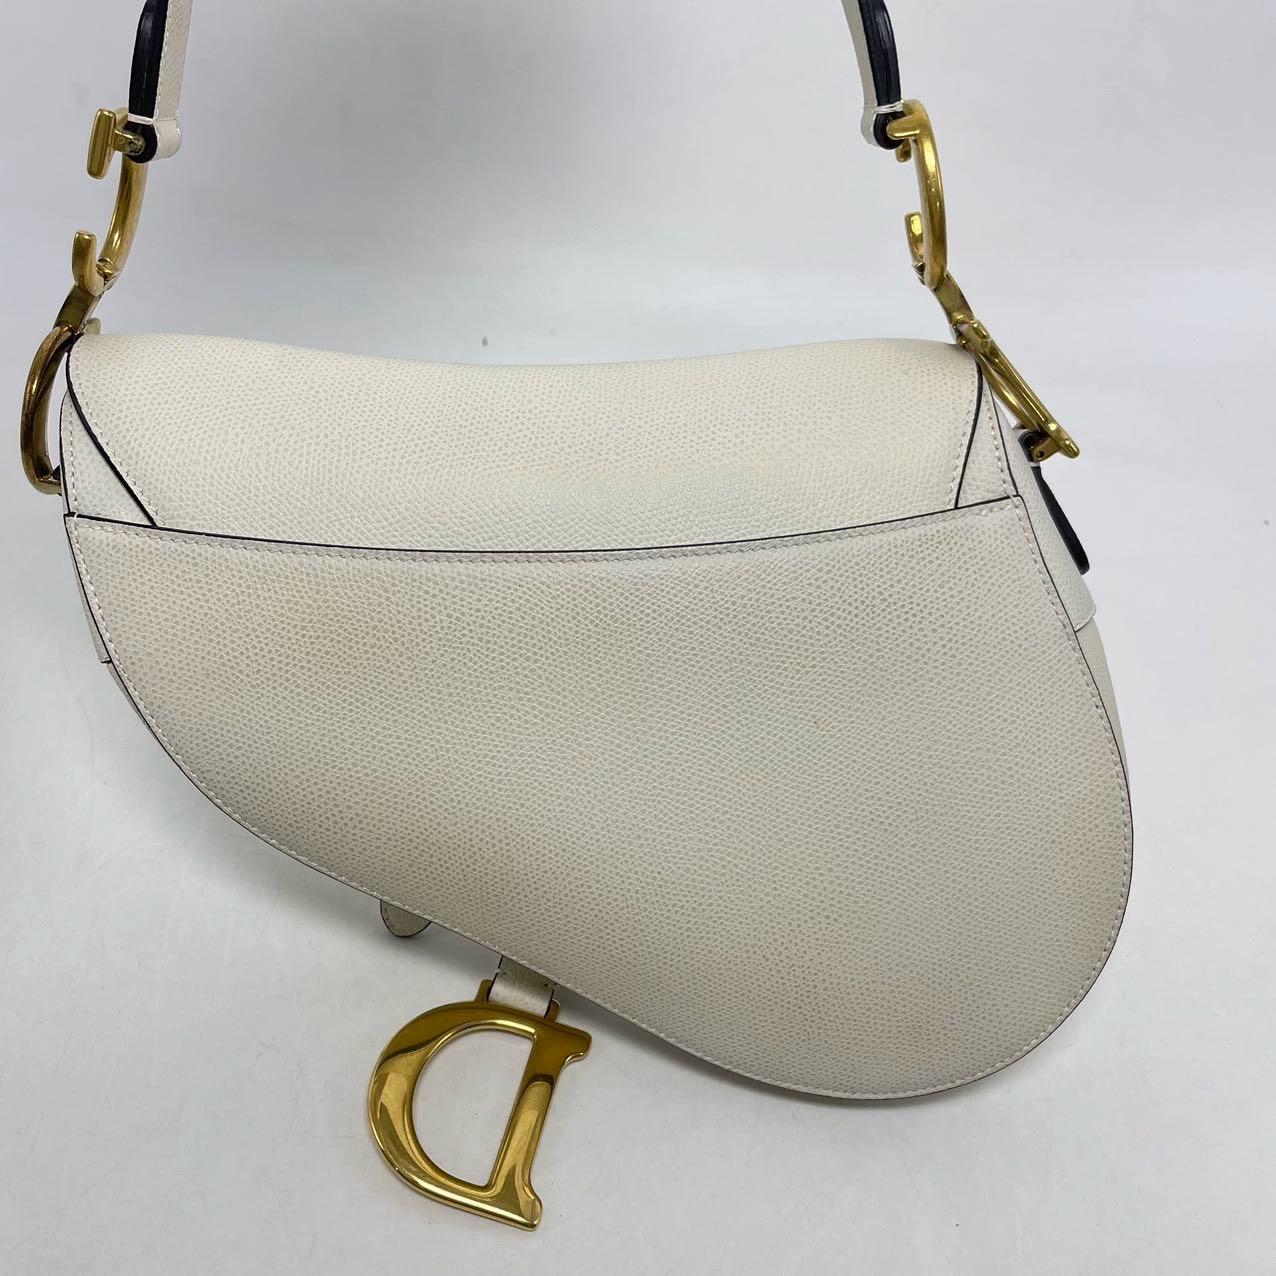 Dior Saddle White Medium Grained Leather Handbag In Excellent Condition For Sale In AUBERVILLIERS, FR